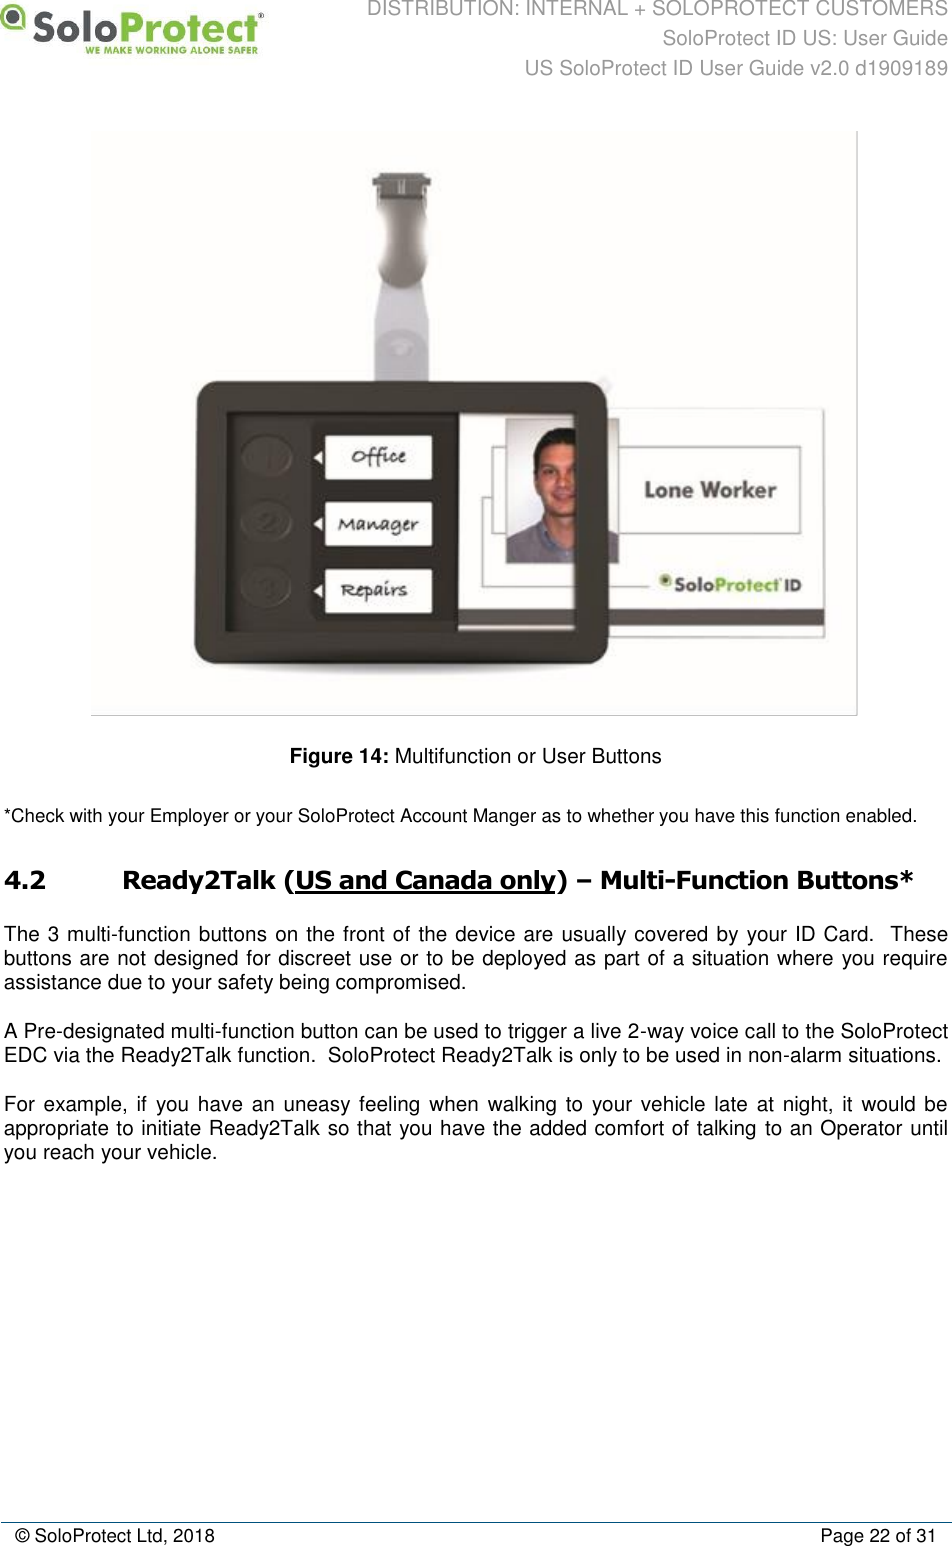 DISTRIBUTION: INTERNAL + SOLOPROTECT CUSTOMERS SoloProtect ID US: User Guide US SoloProtect ID User Guide v2.0 d1909189  © SoloProtect Ltd, 2018  Page 22 of 31  Figure 14: Multifunction or User Buttons *Check with your Employer or your SoloProtect Account Manger as to whether you have this function enabled. 4.2 Ready2Talk (US and Canada only) – Multi-Function Buttons* The 3 multi-function buttons on the front of the device are usually covered by your ID Card.  These buttons are not designed for discreet use or to be deployed as part of a situation where you require assistance due to your safety being compromised. A Pre-designated multi-function button can be used to trigger a live 2-way voice call to the SoloProtect EDC via the Ready2Talk function.  SoloProtect Ready2Talk is only to be used in non-alarm situations. For example, if you have an uneasy feeling when  walking to  your vehicle late  at night, it  would be appropriate to initiate Ready2Talk so that you have the added comfort of talking to an Operator until you reach your vehicle. 